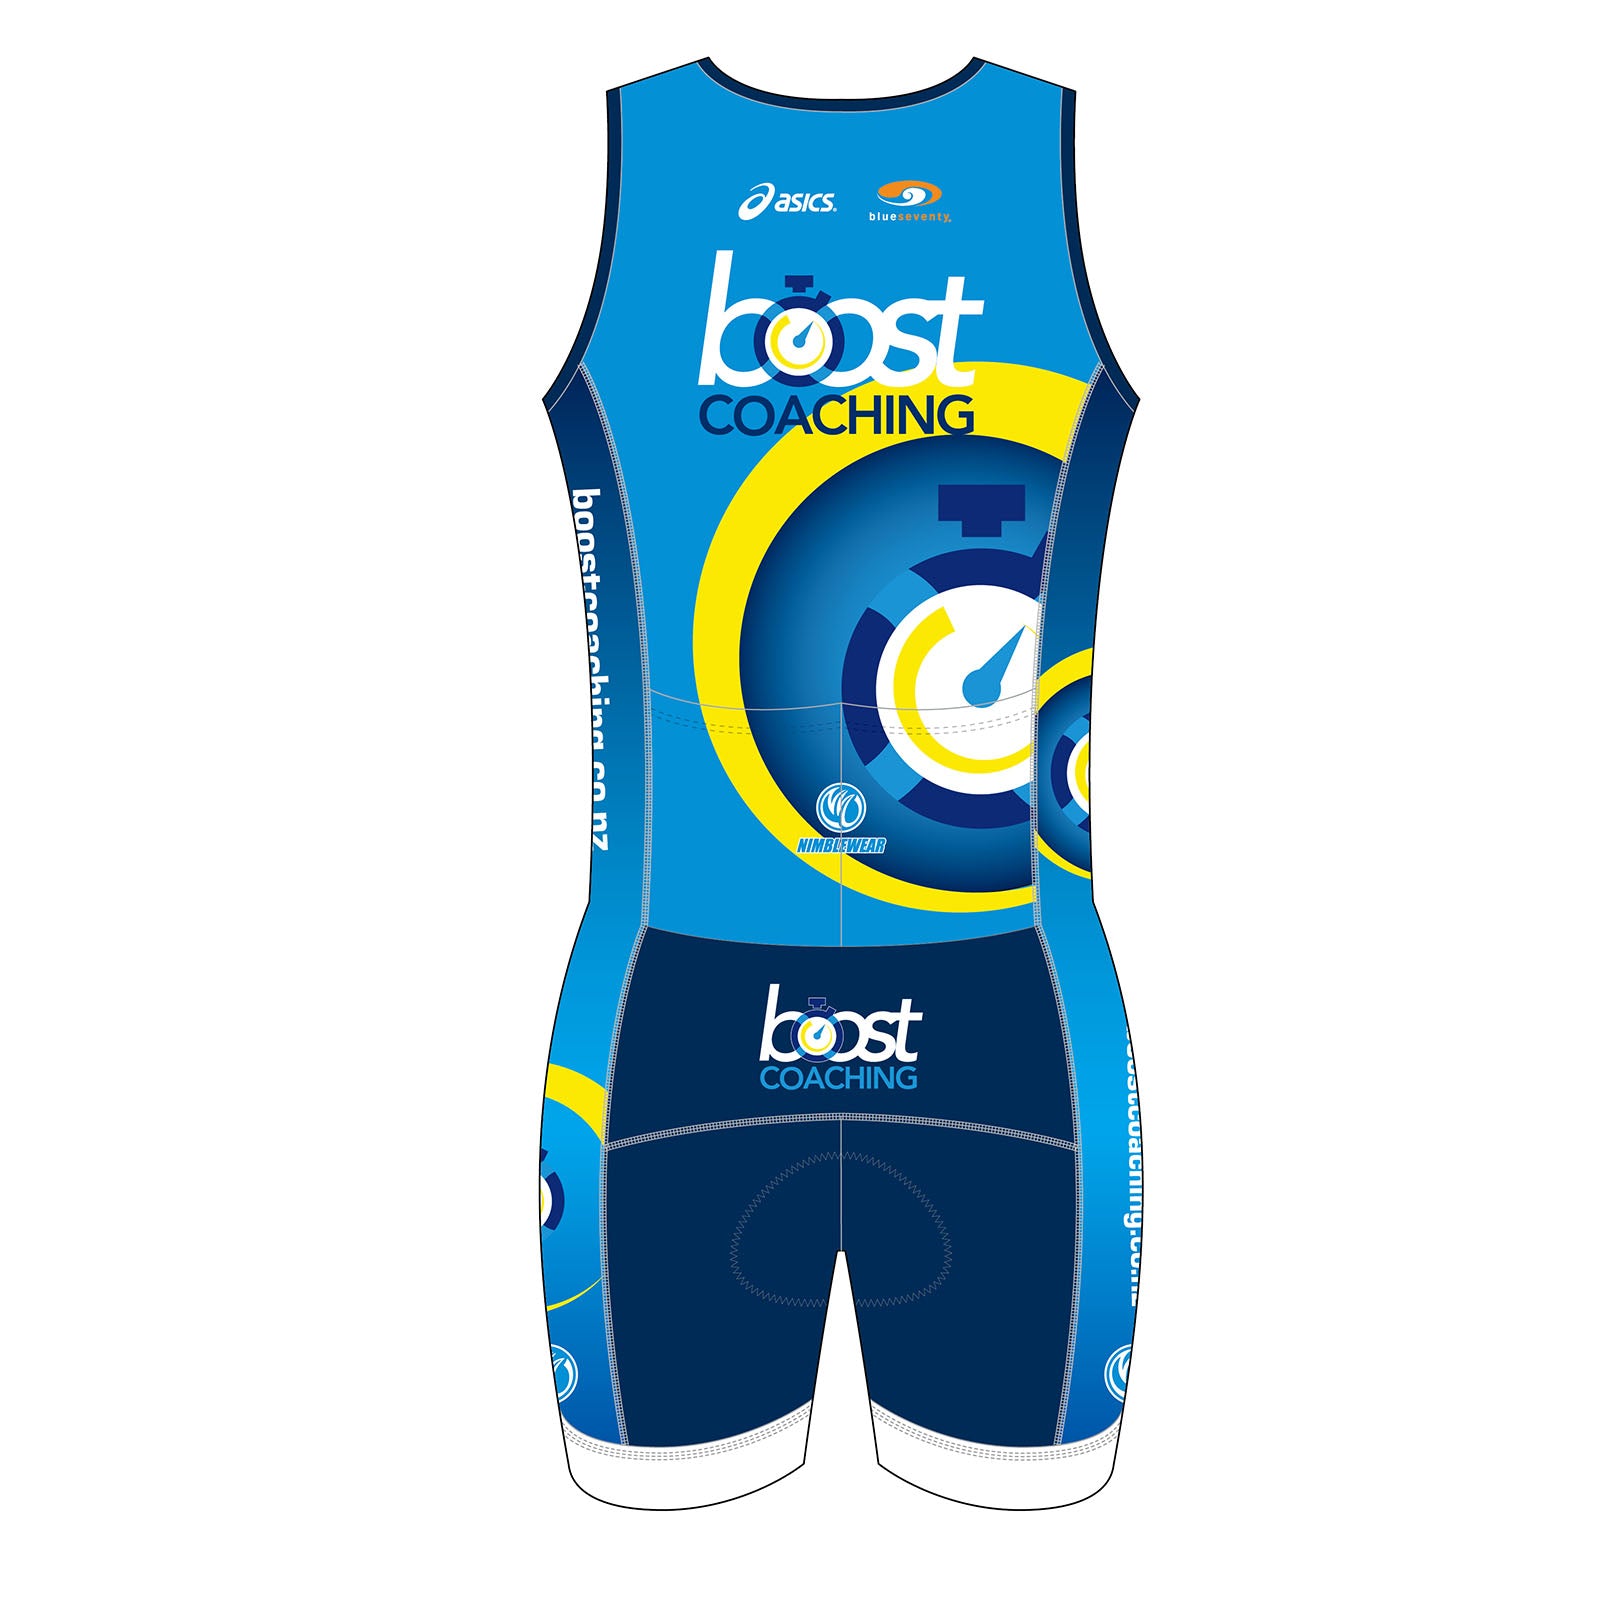 Boost Coaching GOLD Sleeveless Tri Suits